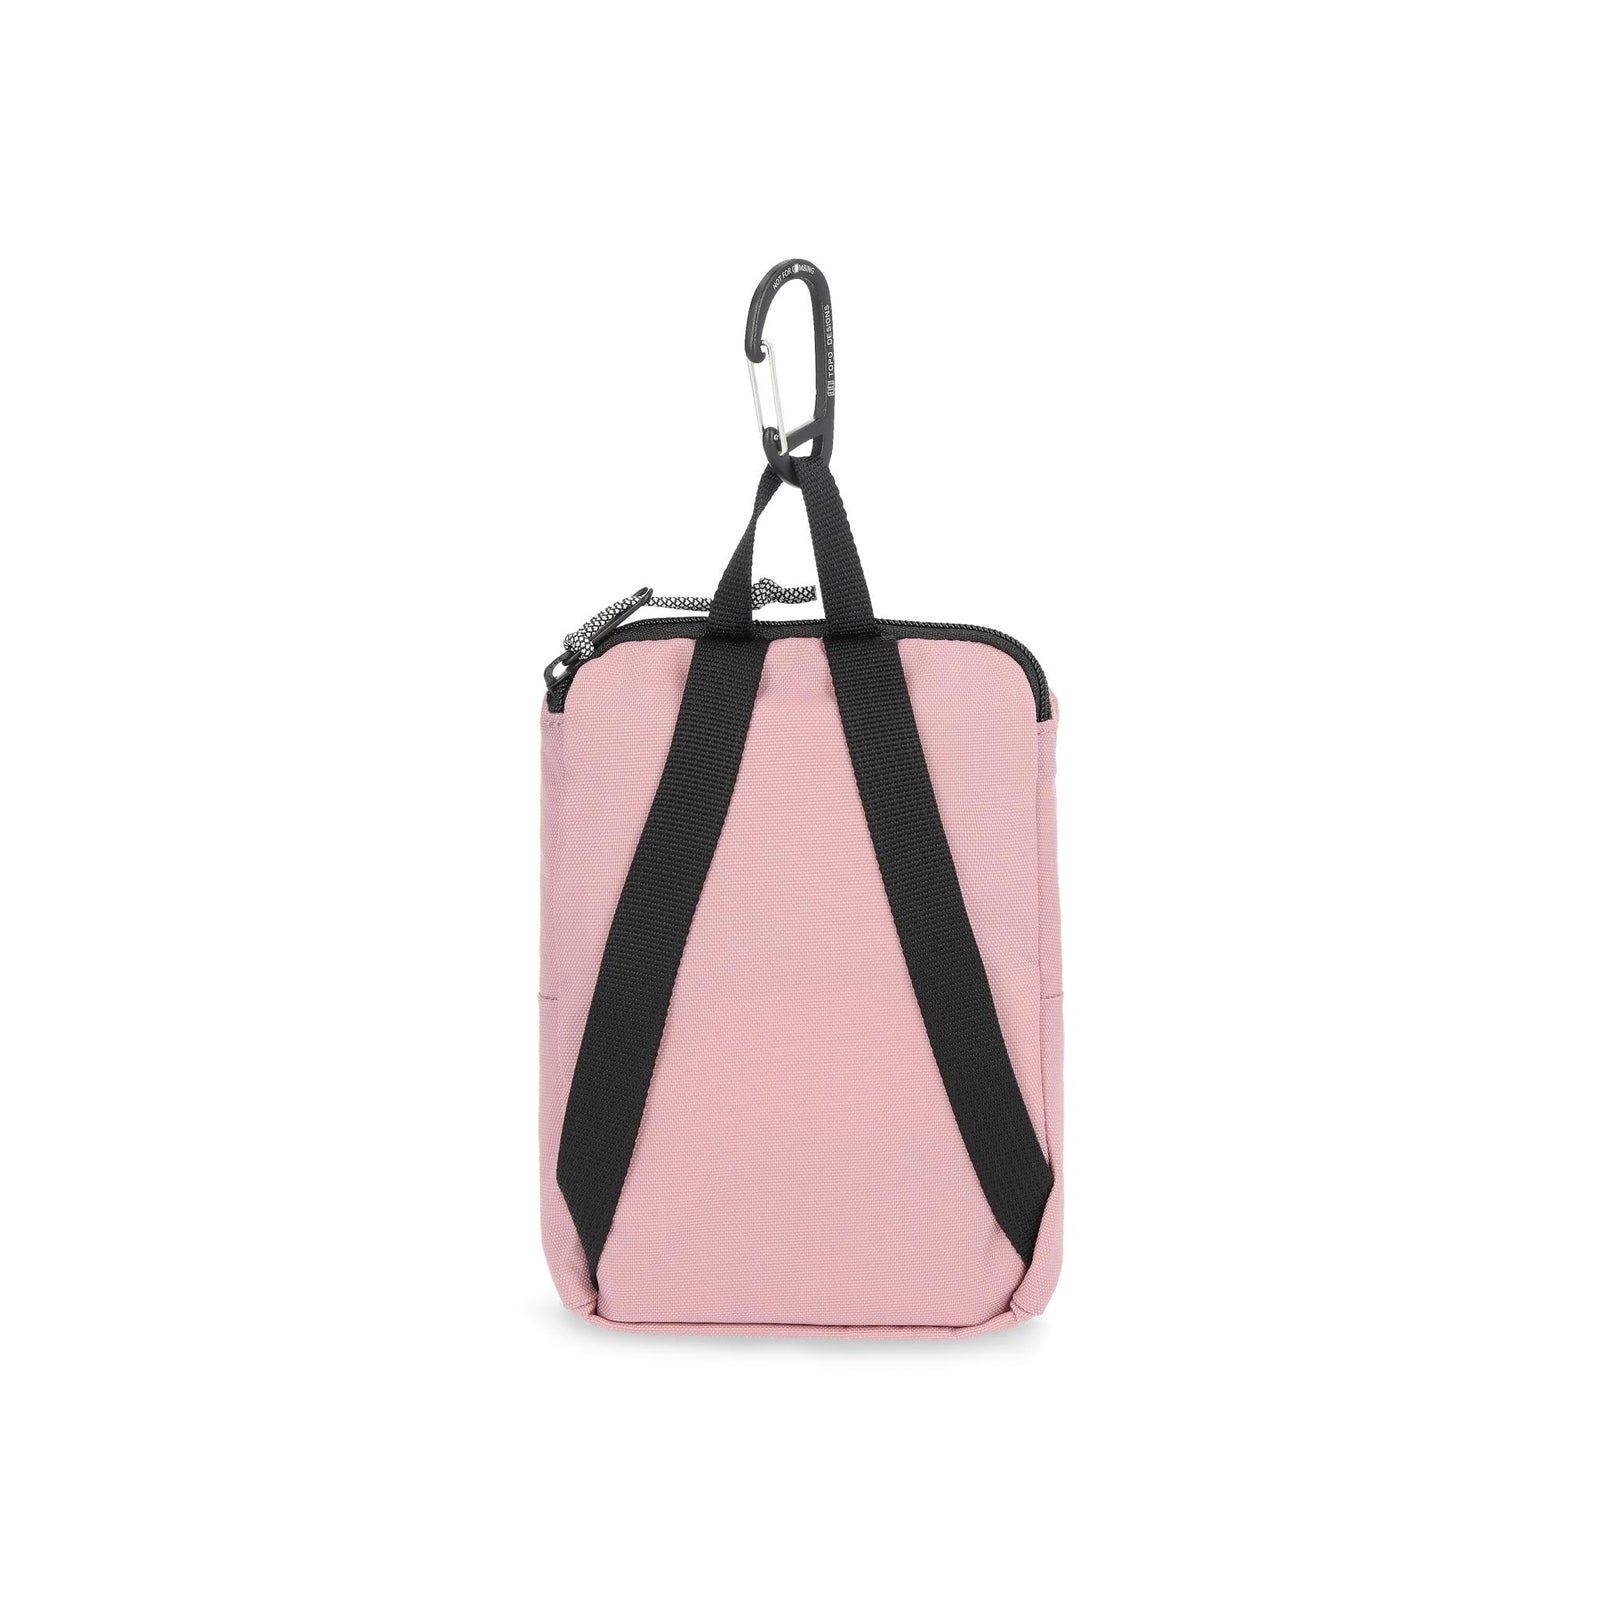 Back View of Topo Designs Rover Pack Micro in "Rose"